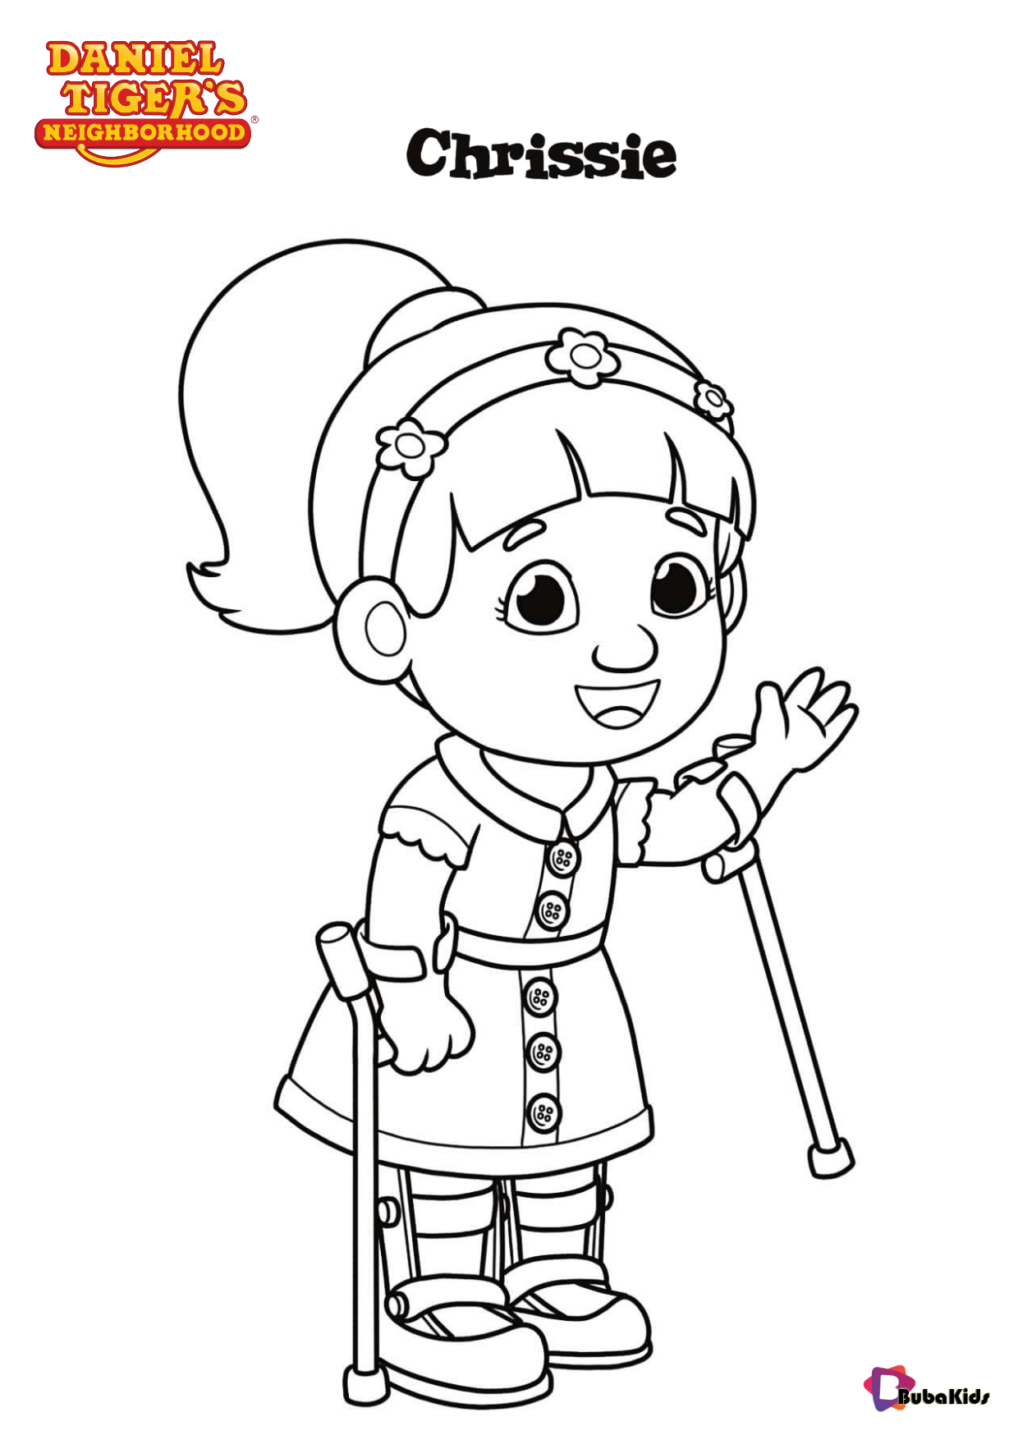 Chrissie coloring page Daniel Tigers Neighborhood tv serials coloring pages